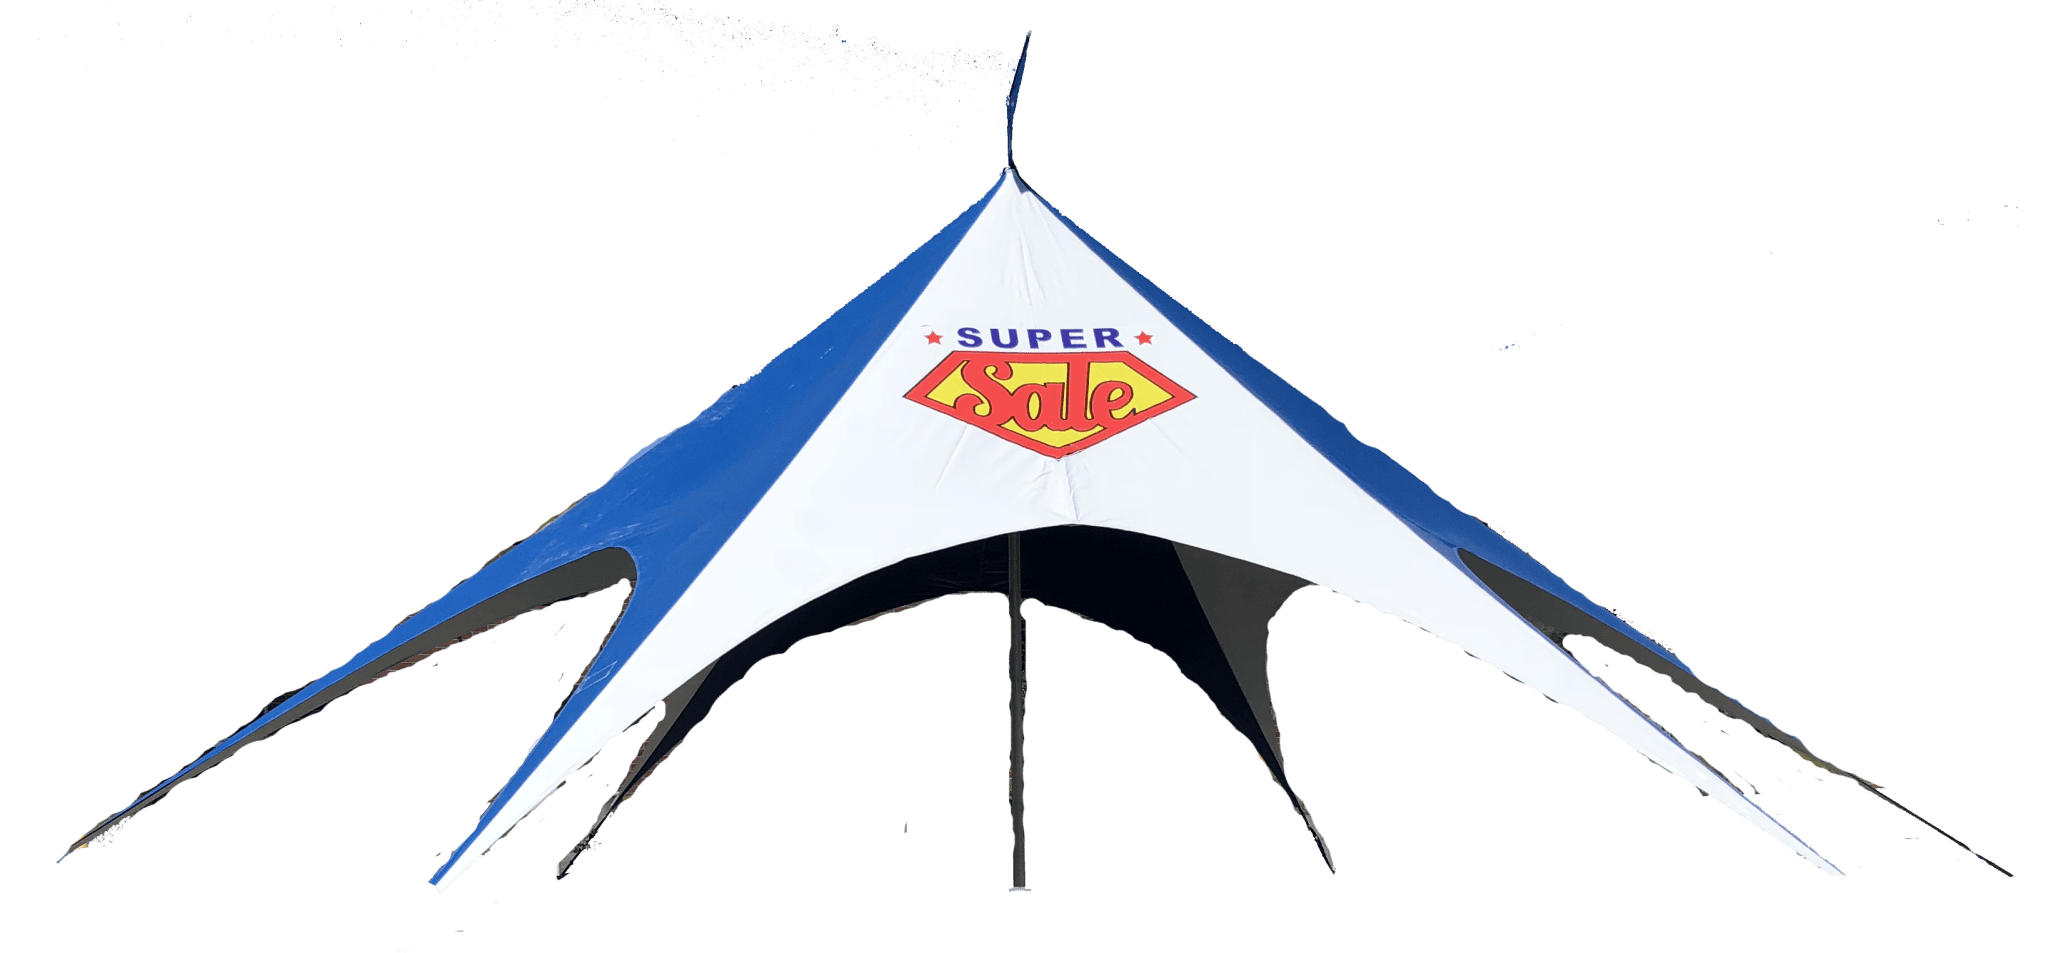 Star tent with 'Super Sale' banner - Giant Promotions